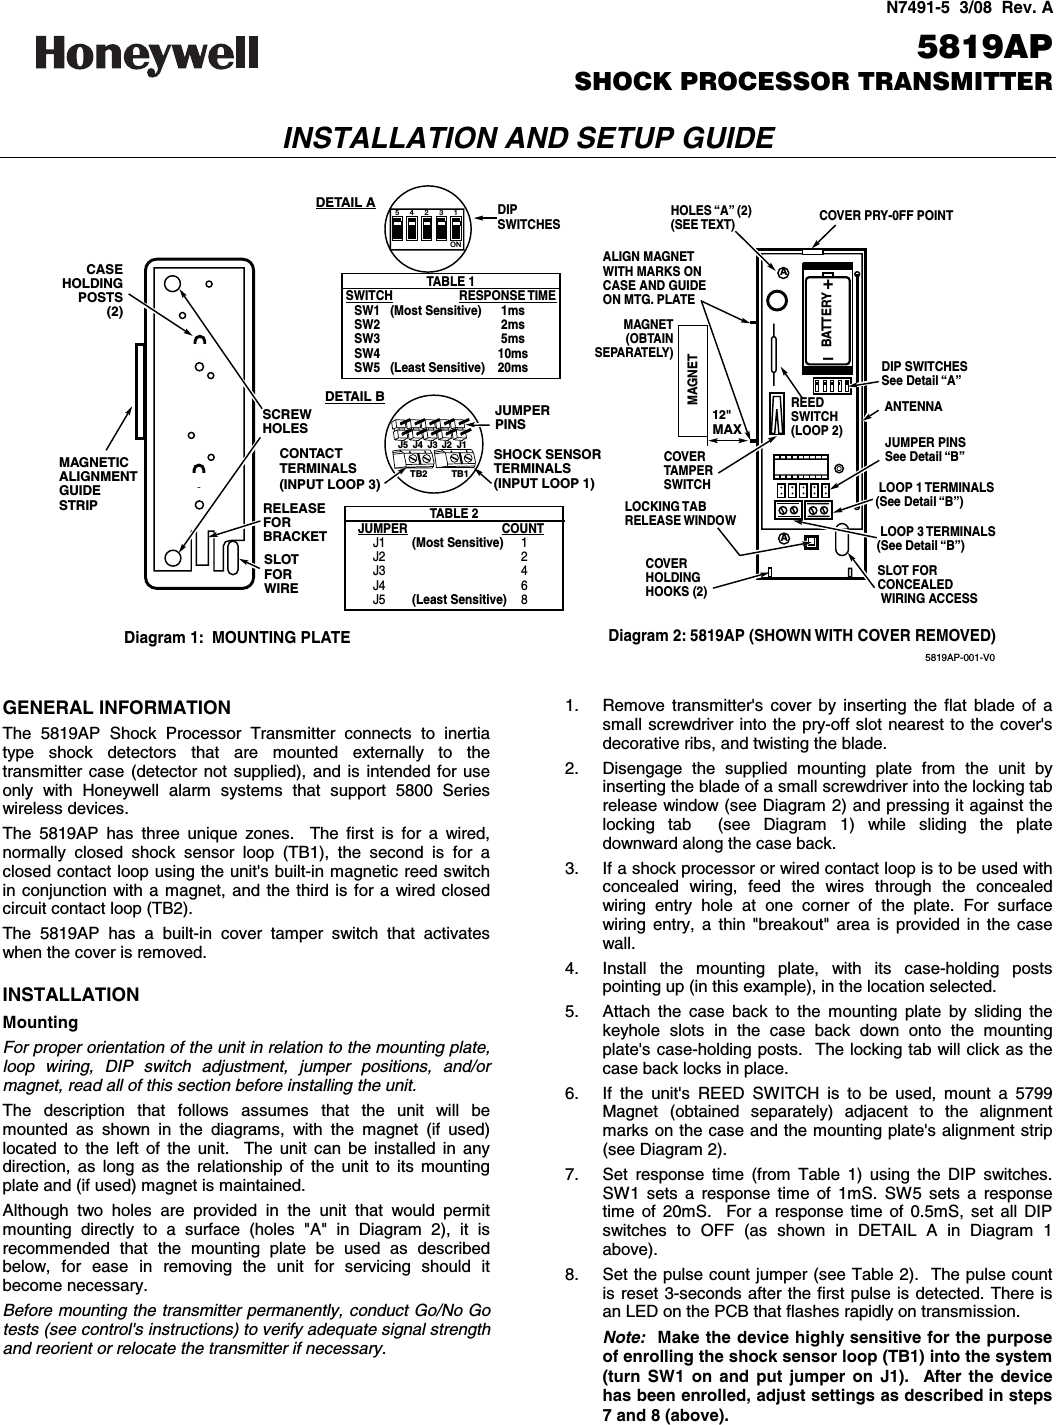  N7491-5  3/08  Rev. A   5819AP SHOCK PROCESSOR TRANSMITTER INSTALLATION AND SETUP GUIDE  A+–BATTERYREEDSWITCH(LOOP 2)COVER PRY-0FF POINTALIGN MAGNETWITH MARKS ONCASE AND GUIDEON MTG. PLATEMAGNET (OBTAIN SEPARATELY)LOOP 1 TERMINALS(See Detail “B”)LOCKING TABRELEASE WINDOWCOVERHOLDINGHOOKS (2)COVERTAMPERSWITCHHOLES “A” (2)(SEE TEXT)ANTENNADIP SWITCHESSee Detail “A”DIPSWITCHESJUMPER PINSSee Detail “B”SLOT FORCONCEALEDWIRING ACCESSAMAGNETDiagram 2: 5819AP (SHOWN WITH COVER REMOVED)12&quot;MAX12345ONTB2 TB1MAGNETICALIGNMENTGUIDESTRIP RELEASE FORBRACKETCASEHOLDINGPOSTS(2)SLOT FOR WIRESCREWHOLESDiagram 1:  MOUNTING PLATETABLE 1SWITCH RESPONSE TIMESW1   (Most Sensitive) 1msSW2 2msSW3 5msSW4 10msSW5   (Least Sensitive) 20msJUMPERPINSSHOCK SENSORTERMINALS(INPUT LOOP 1)TABLE 2JUMPER COUNTJ1        (Most Sensitive) 1J2 2J3 4J4 6J5        (Least Sensitive) 8J5 J4 J3 J2 J1DETAIL BDETAIL ACONTACTTERMINALS(INPUT LOOP 3)LOOP 3 TERMINALS(See Detail “B”)5819AP-001-V0  GENERAL INFORMATION The 5819AP Shock Processor Transmitter connects to inertia type shock detectors that are mounted externally to the transmitter case (detector not supplied), and is intended for use only with Honeywell alarm systems that support 5800 Series wireless devices. The 5819AP has three unique zones.  The first is for a wired, normally closed shock sensor loop (TB1), the second is for a closed contact loop using the unit&apos;s built-in magnetic reed switch in conjunction with a magnet, and the third is for a wired closed circuit contact loop (TB2).   The 5819AP has a built-in cover tamper switch that activates when the cover is removed.  INSTALLATION Mounting For proper orientation of the unit in relation to the mounting plate, loop wiring, DIP switch adjustment, jumper positions, and/or magnet, read all of this section before installing the unit. The description that follows assumes that the unit will be mounted as shown in the diagrams, with the magnet (if used) located to the left of the unit.  The unit can be installed in any direction, as long as the relationship of the unit to its mounting plate and (if used) magnet is maintained. Although two holes are provided in the unit that would permit mounting directly to a surface (holes &quot;A&quot; in Diagram 2), it is recommended that the mounting plate be used as described below, for ease in removing the unit for servicing should it become necessary. Before mounting the transmitter permanently, conduct Go/No Go tests (see control&apos;s instructions) to verify adequate signal strength and reorient or relocate the transmitter if necessary. 1.  Remove transmitter&apos;s cover by inserting the flat blade of a small screwdriver into the pry-off slot nearest to the cover&apos;s decorative ribs, and twisting the blade. 2.  Disengage the supplied mounting plate from the unit by inserting the blade of a small screwdriver into the locking tab release window (see Diagram 2) and pressing it against the locking tab  (see Diagram 1) while sliding the plate downward along the case back. 3.  If a shock processor or wired contact loop is to be used with concealed wiring, feed the wires through the concealed wiring entry hole at one corner of the plate. For surface wiring entry, a thin &quot;breakout&quot; area is provided in the case wall. 4.  Install the mounting plate, with its case-holding posts pointing up (in this example), in the location selected. 5.  Attach the case back to the mounting plate by sliding the keyhole slots in the case back down onto the mounting plate&apos;s case-holding posts.  The locking tab will click as the case back locks in place. 6.  If the unit&apos;s REED SWITCH is to be used, mount a 5799 Magnet (obtained separately) adjacent to the alignment marks on the case and the mounting plate&apos;s alignment strip (see Diagram 2). 7.  Set response time (from Table 1) using the DIP switches. SW1 sets a response time of 1mS. SW5 sets a response time of 20mS.  For a response time of 0.5mS, set all DIP switches to OFF (as shown in DETAIL A in Diagram 1 above).   8.  Set the pulse count jumper (see Table 2).  The pulse count is reset 3-seconds after the first pulse is detected. There is an LED on the PCB that flashes rapidly on transmission. Note:  Make the device highly sensitive for the purpose of enrolling the shock sensor loop (TB1) into the system (turn SW1 on and put jumper on J1).  After the device has been enrolled, adjust settings as described in steps 7 and 8 (above). 